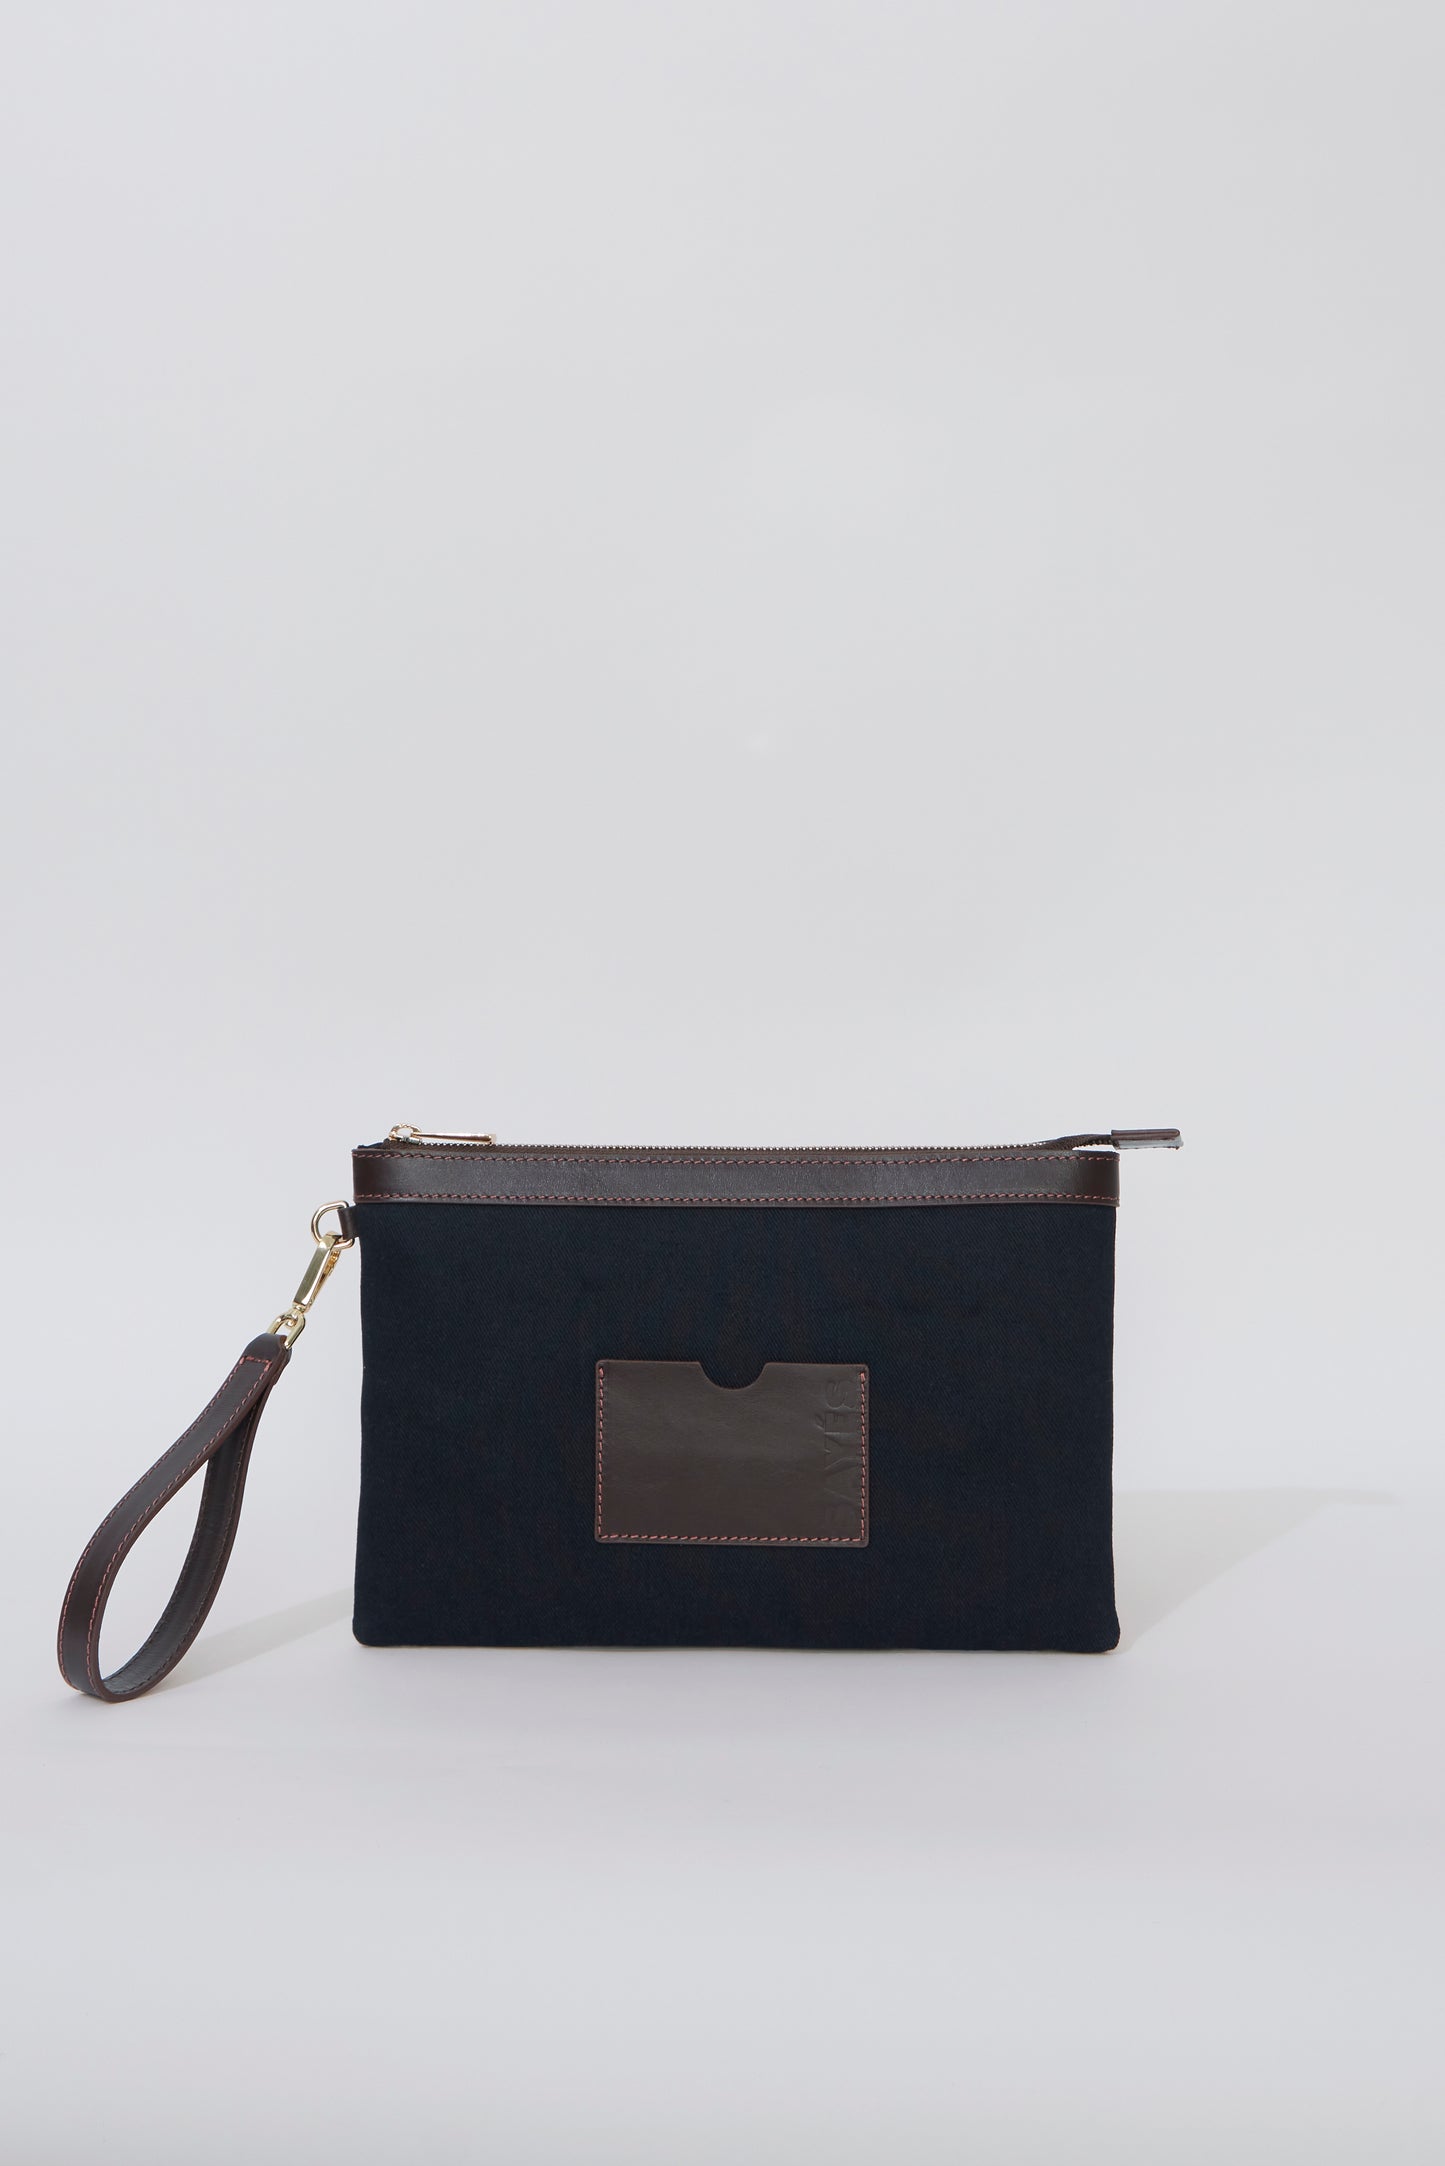 STITCHED CLUTCH BAG IN NAVY AND BROWN